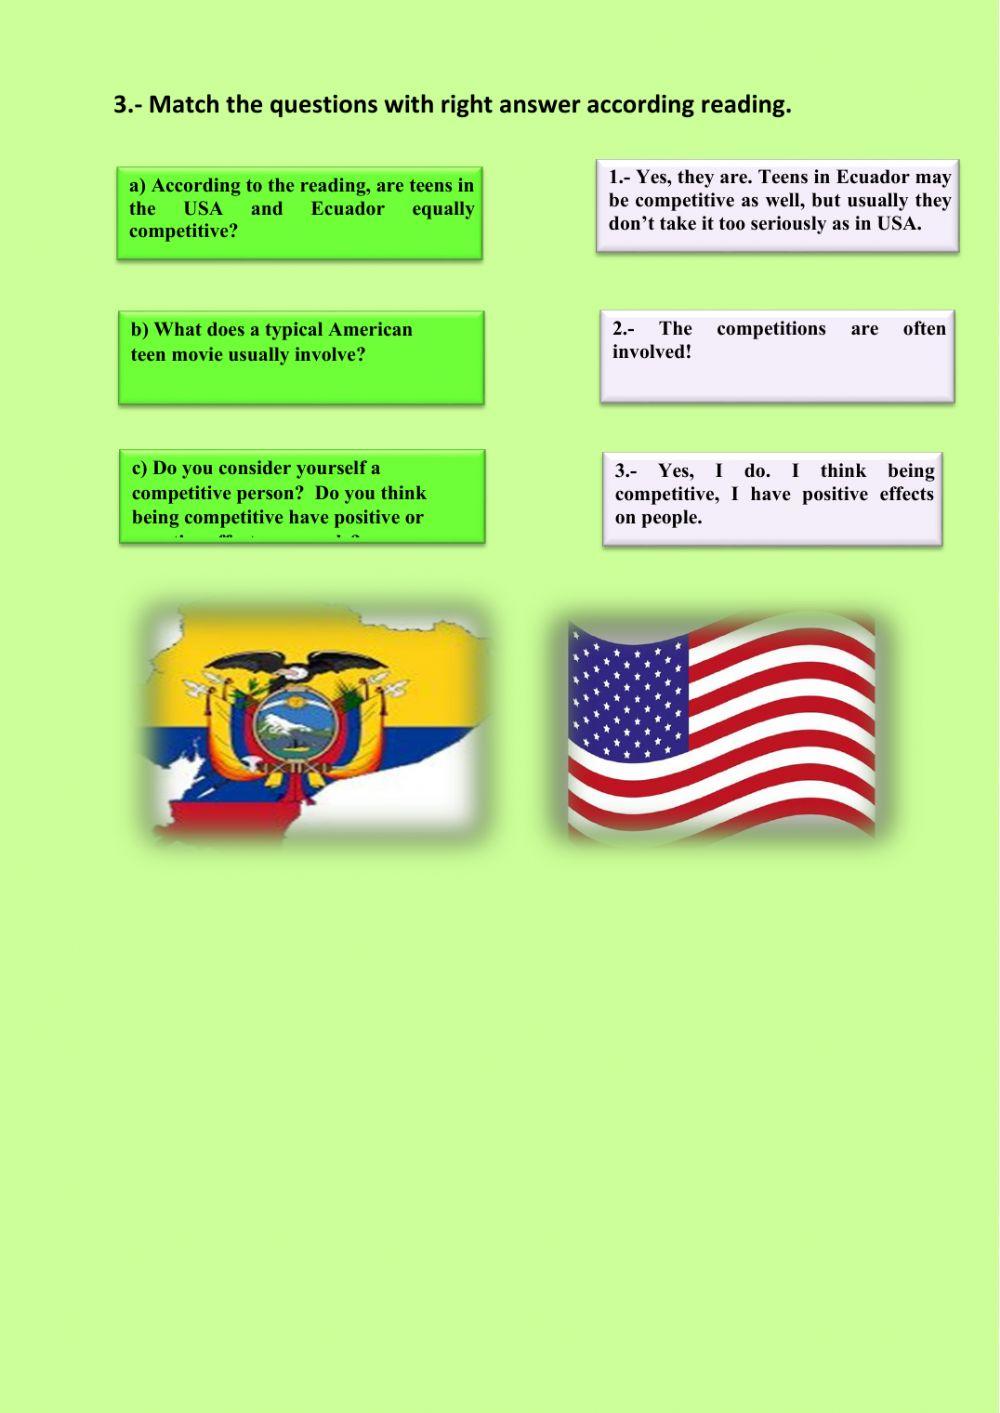 Some differences between USA and ECUADOR